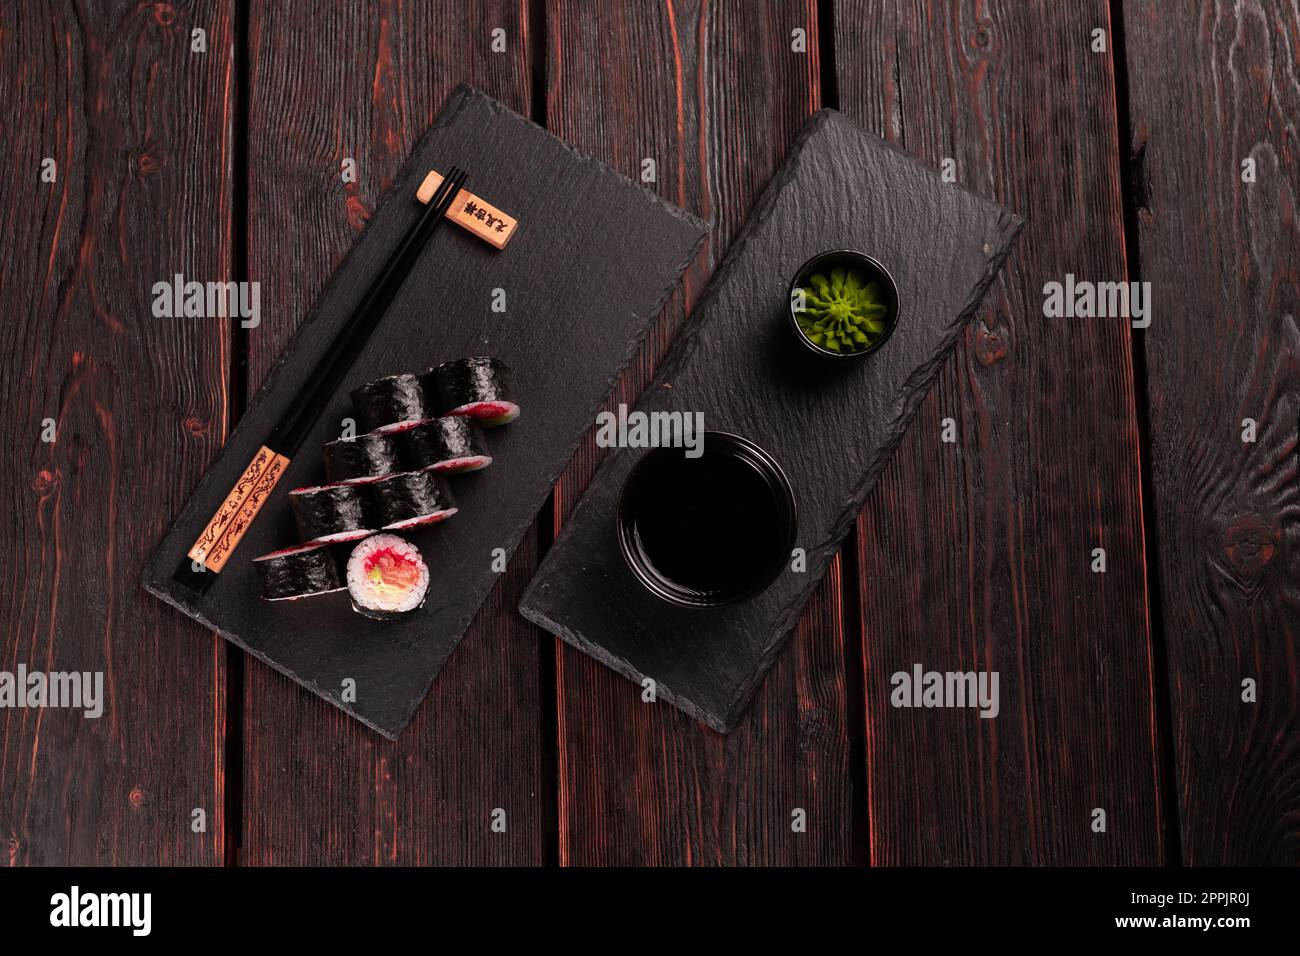 Maki sushi roll with salmon avocado and tobiko caviar served on black board top view - Japanese food Stock Photo